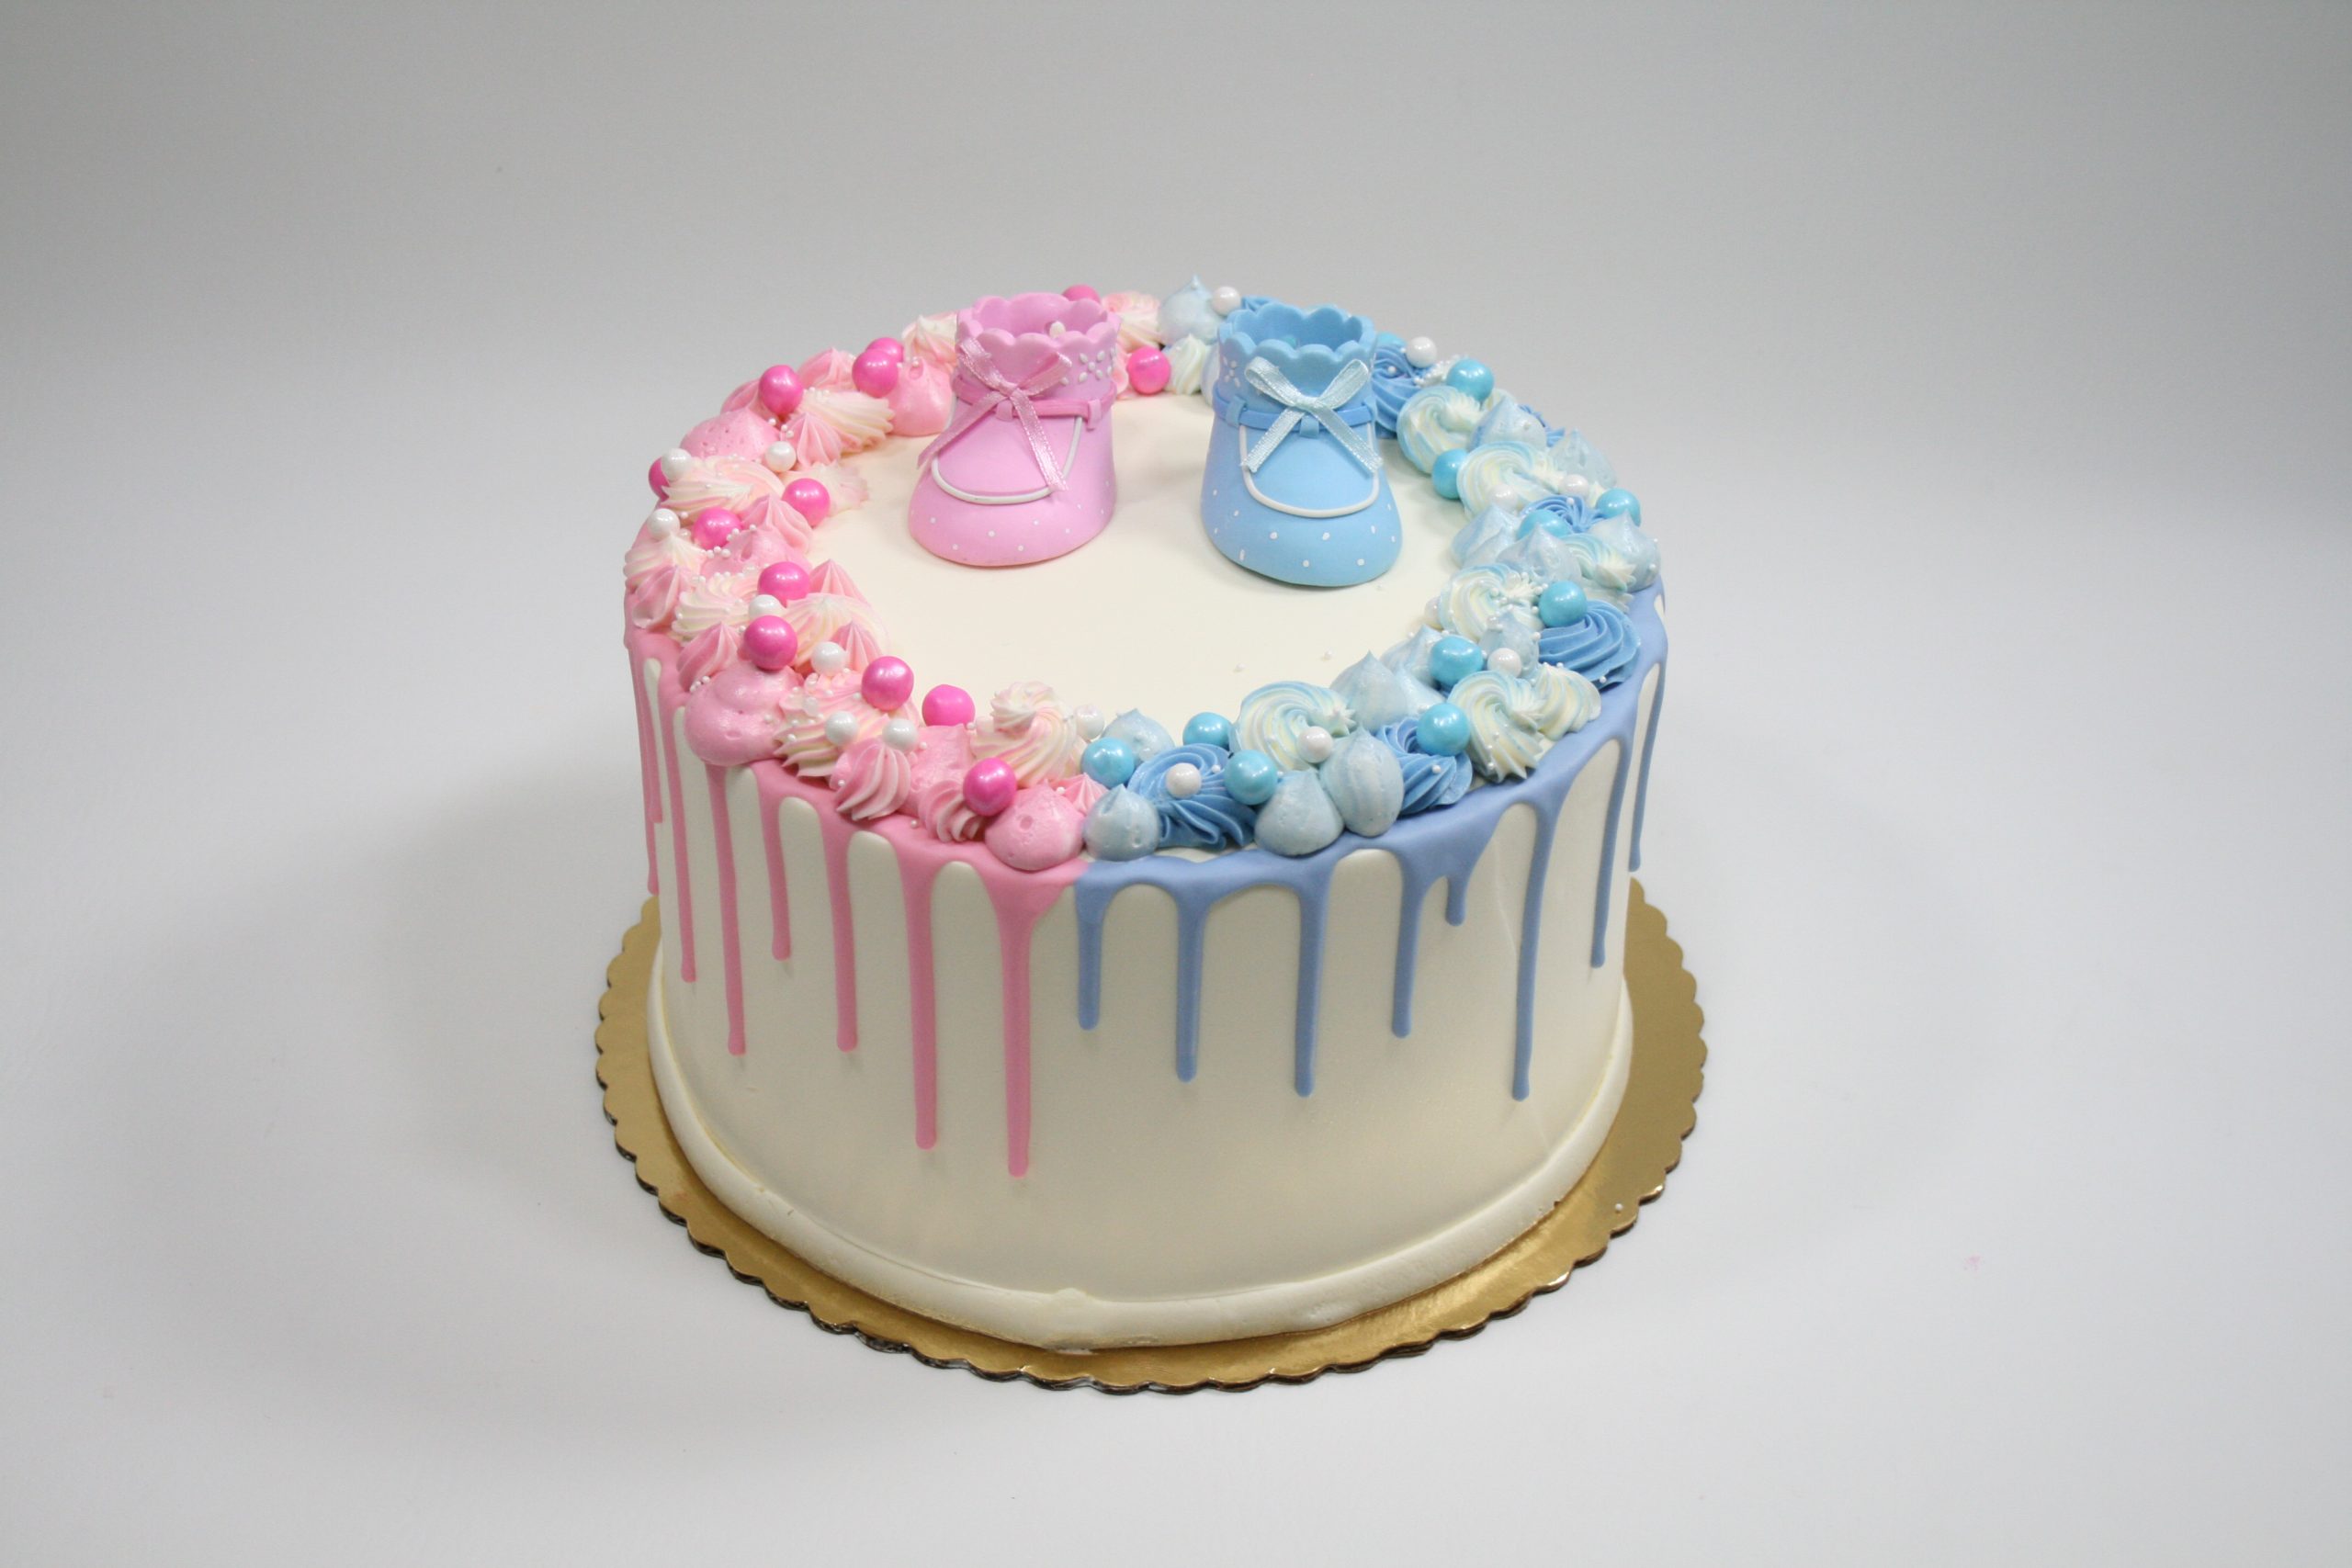 25 Unique Gender Reveal Cake Ideas - Another Mommy Blogger